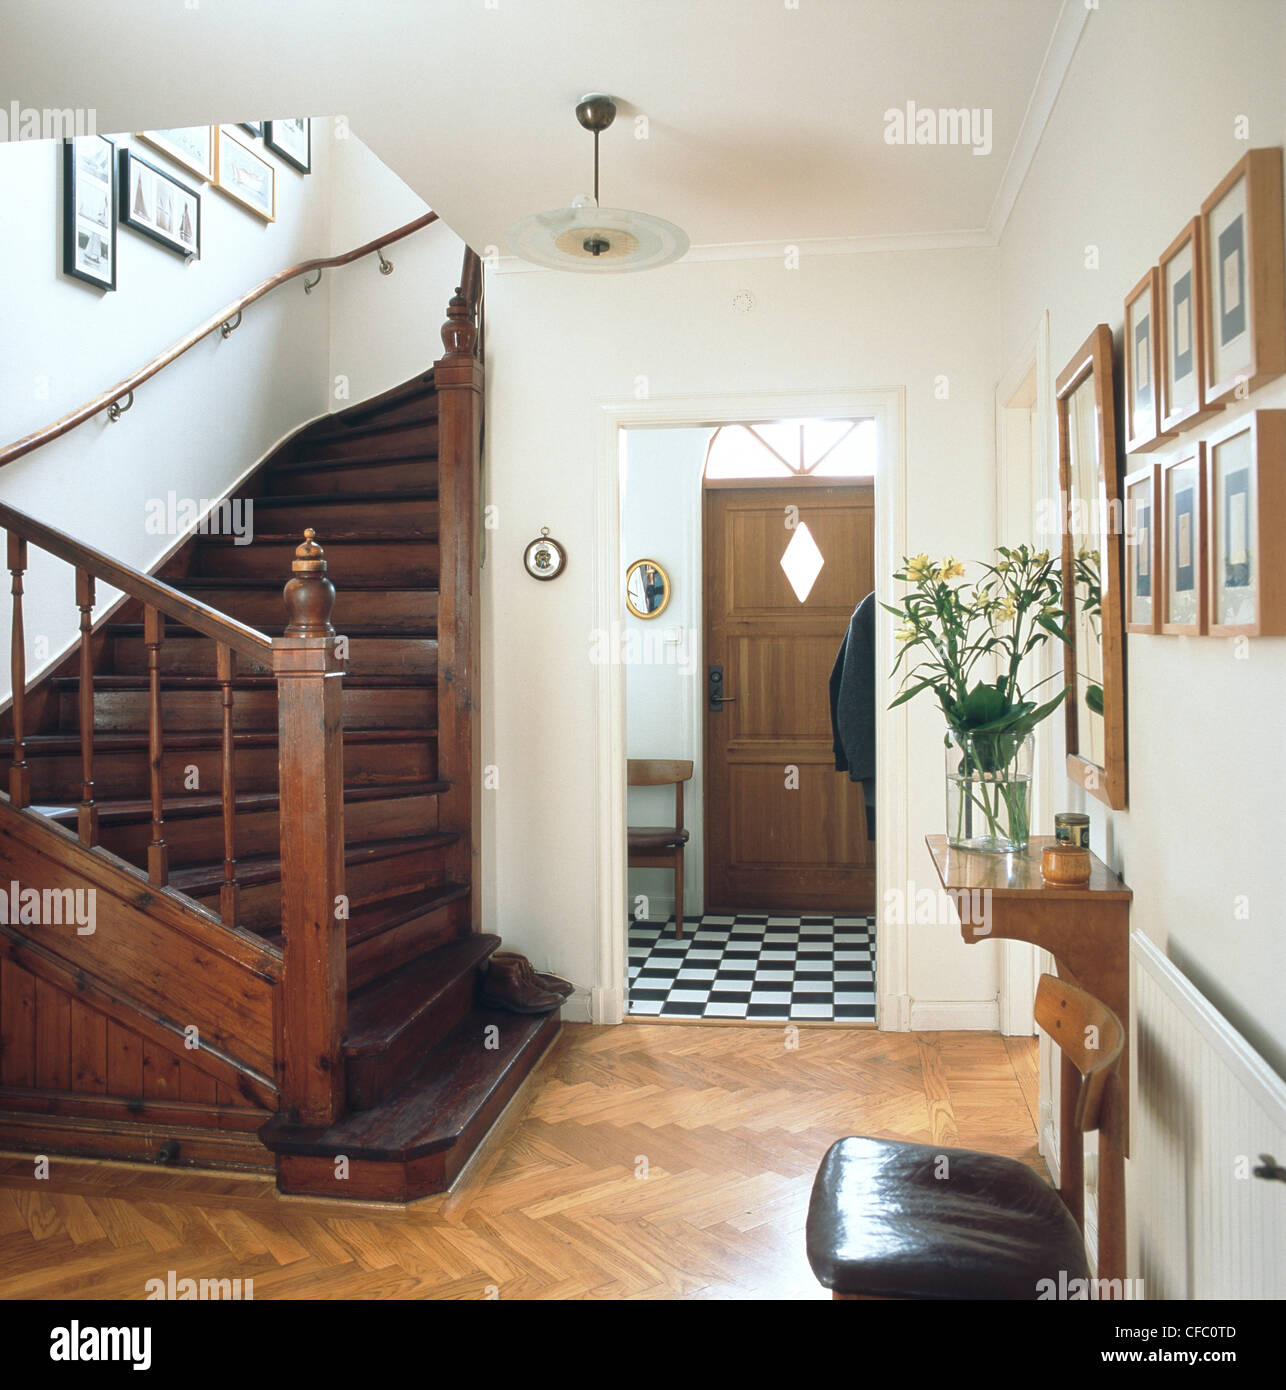 Hallway Curved Wooden Staircase Parquet Flooring And Black And